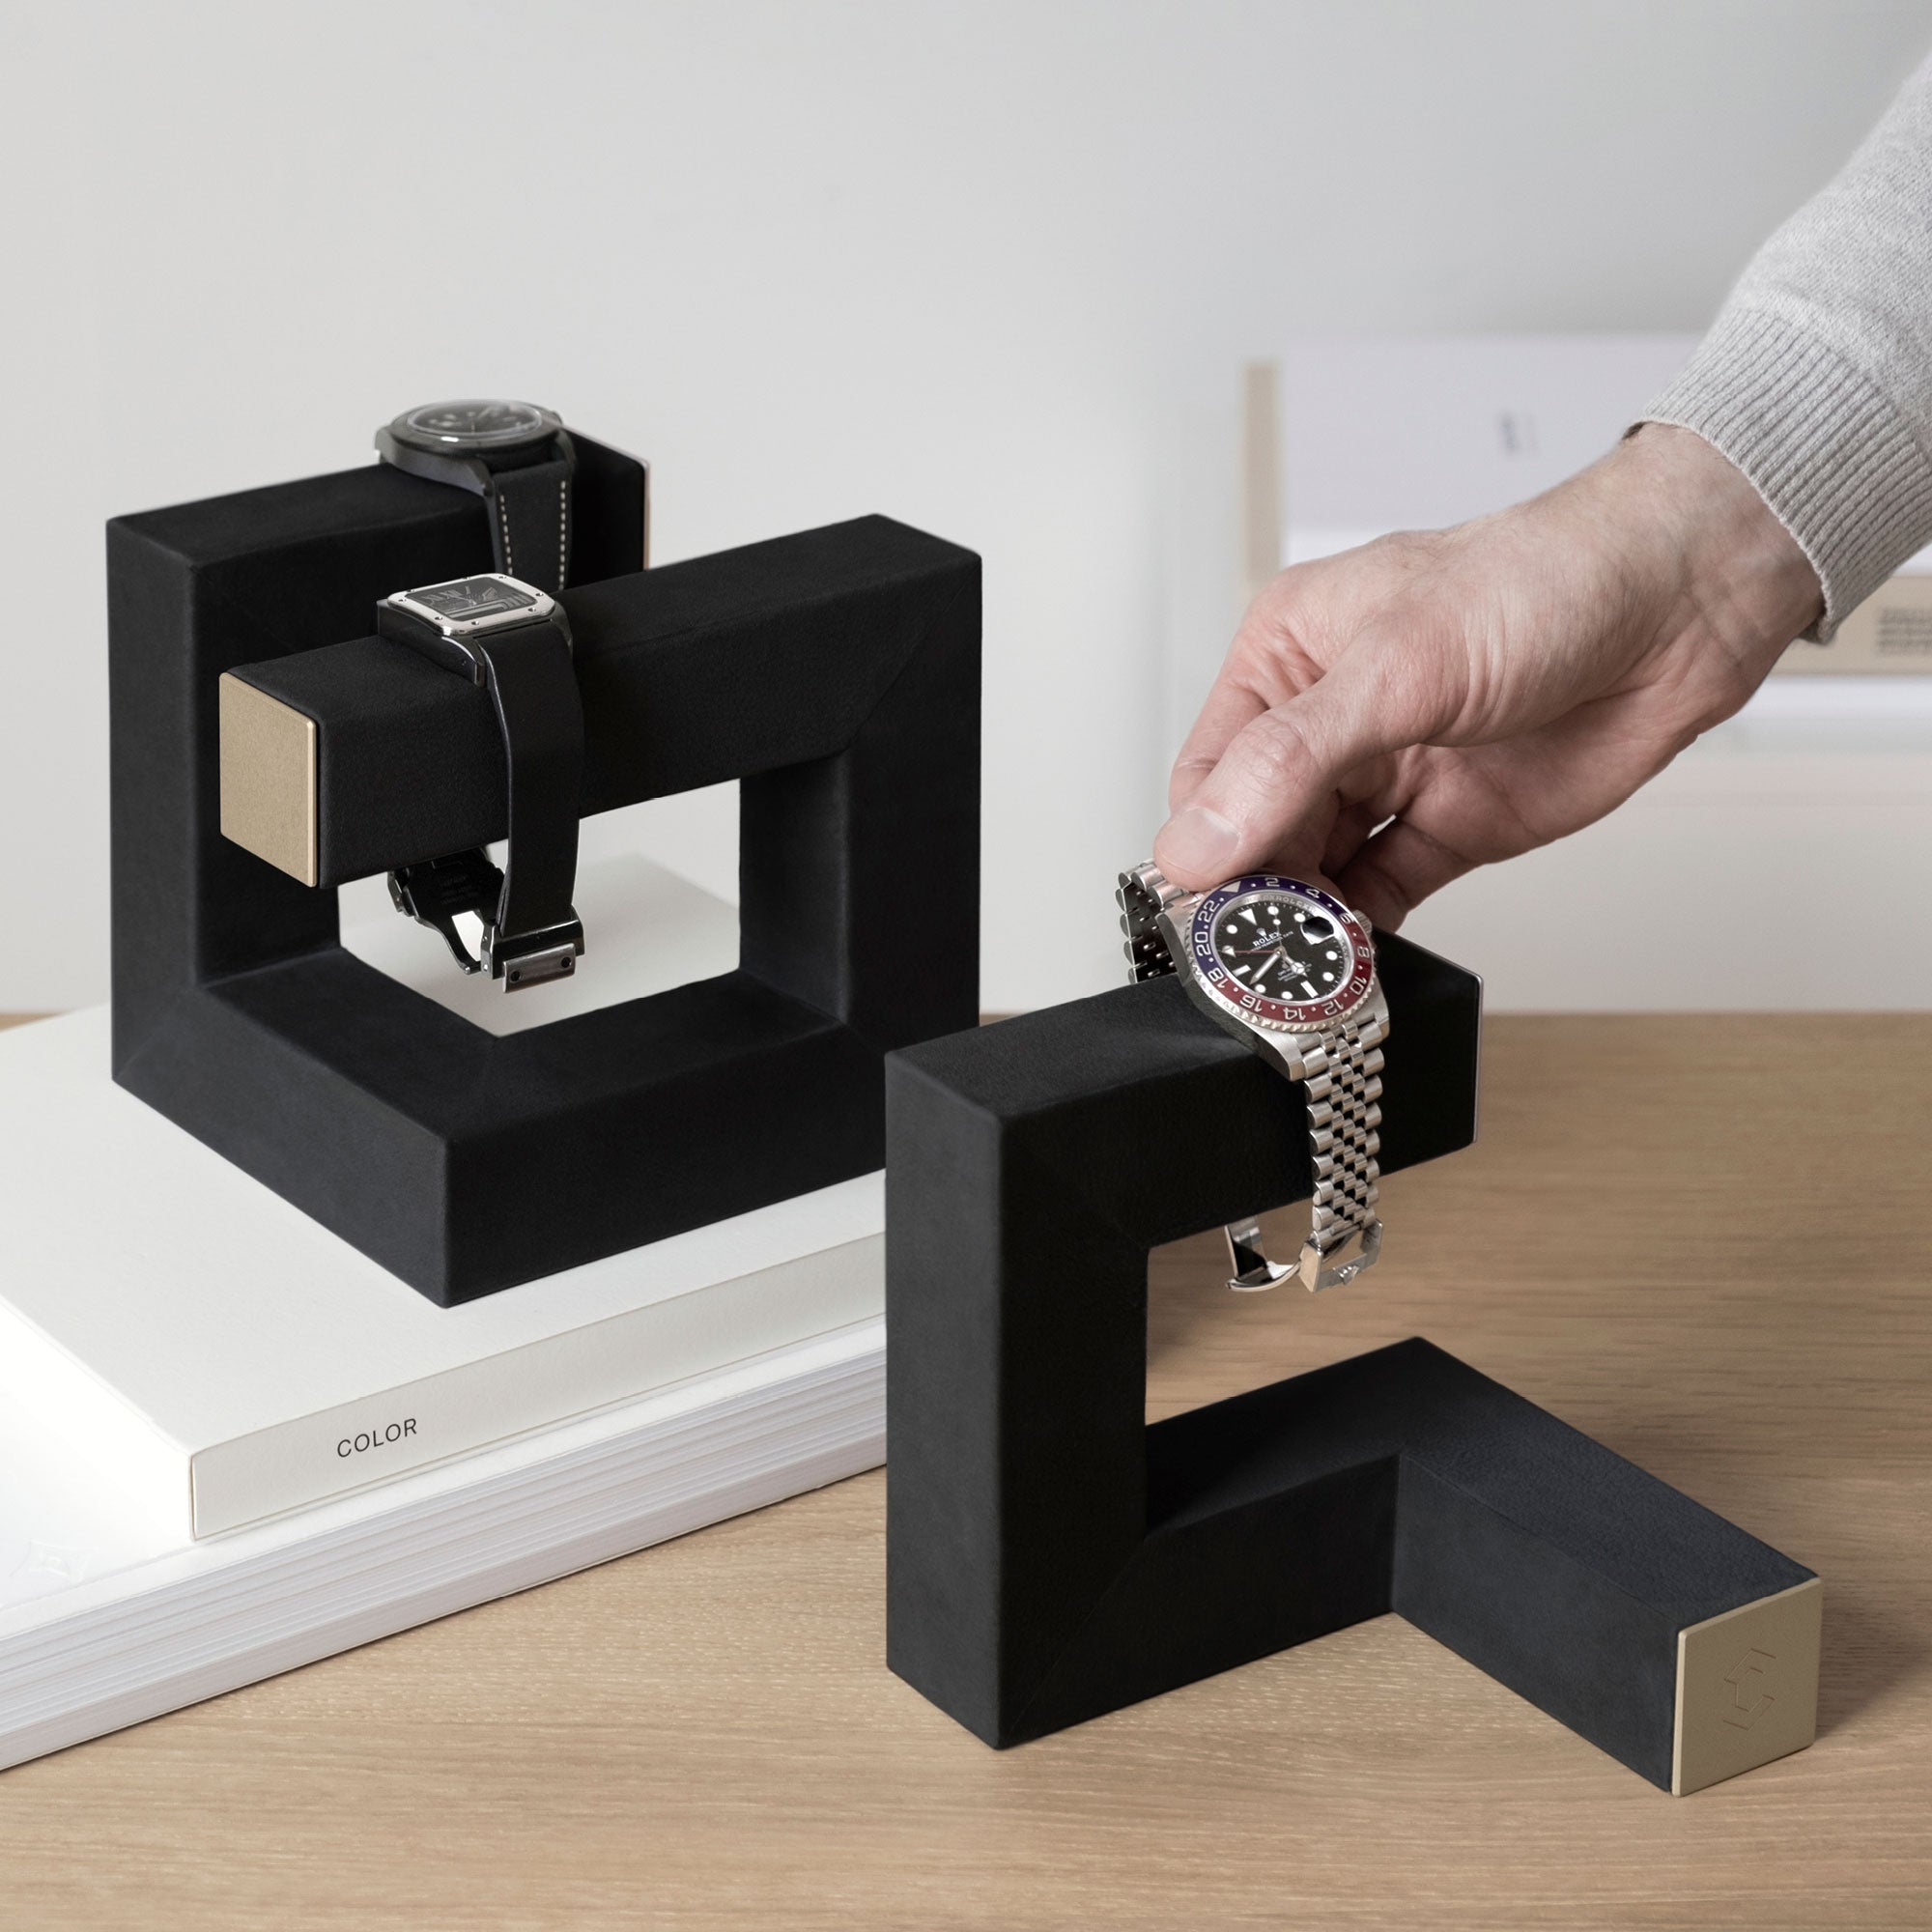 Hudson Watch stands in black leather and gold displaying watches at home. Man is taking his watch from the watch stand 